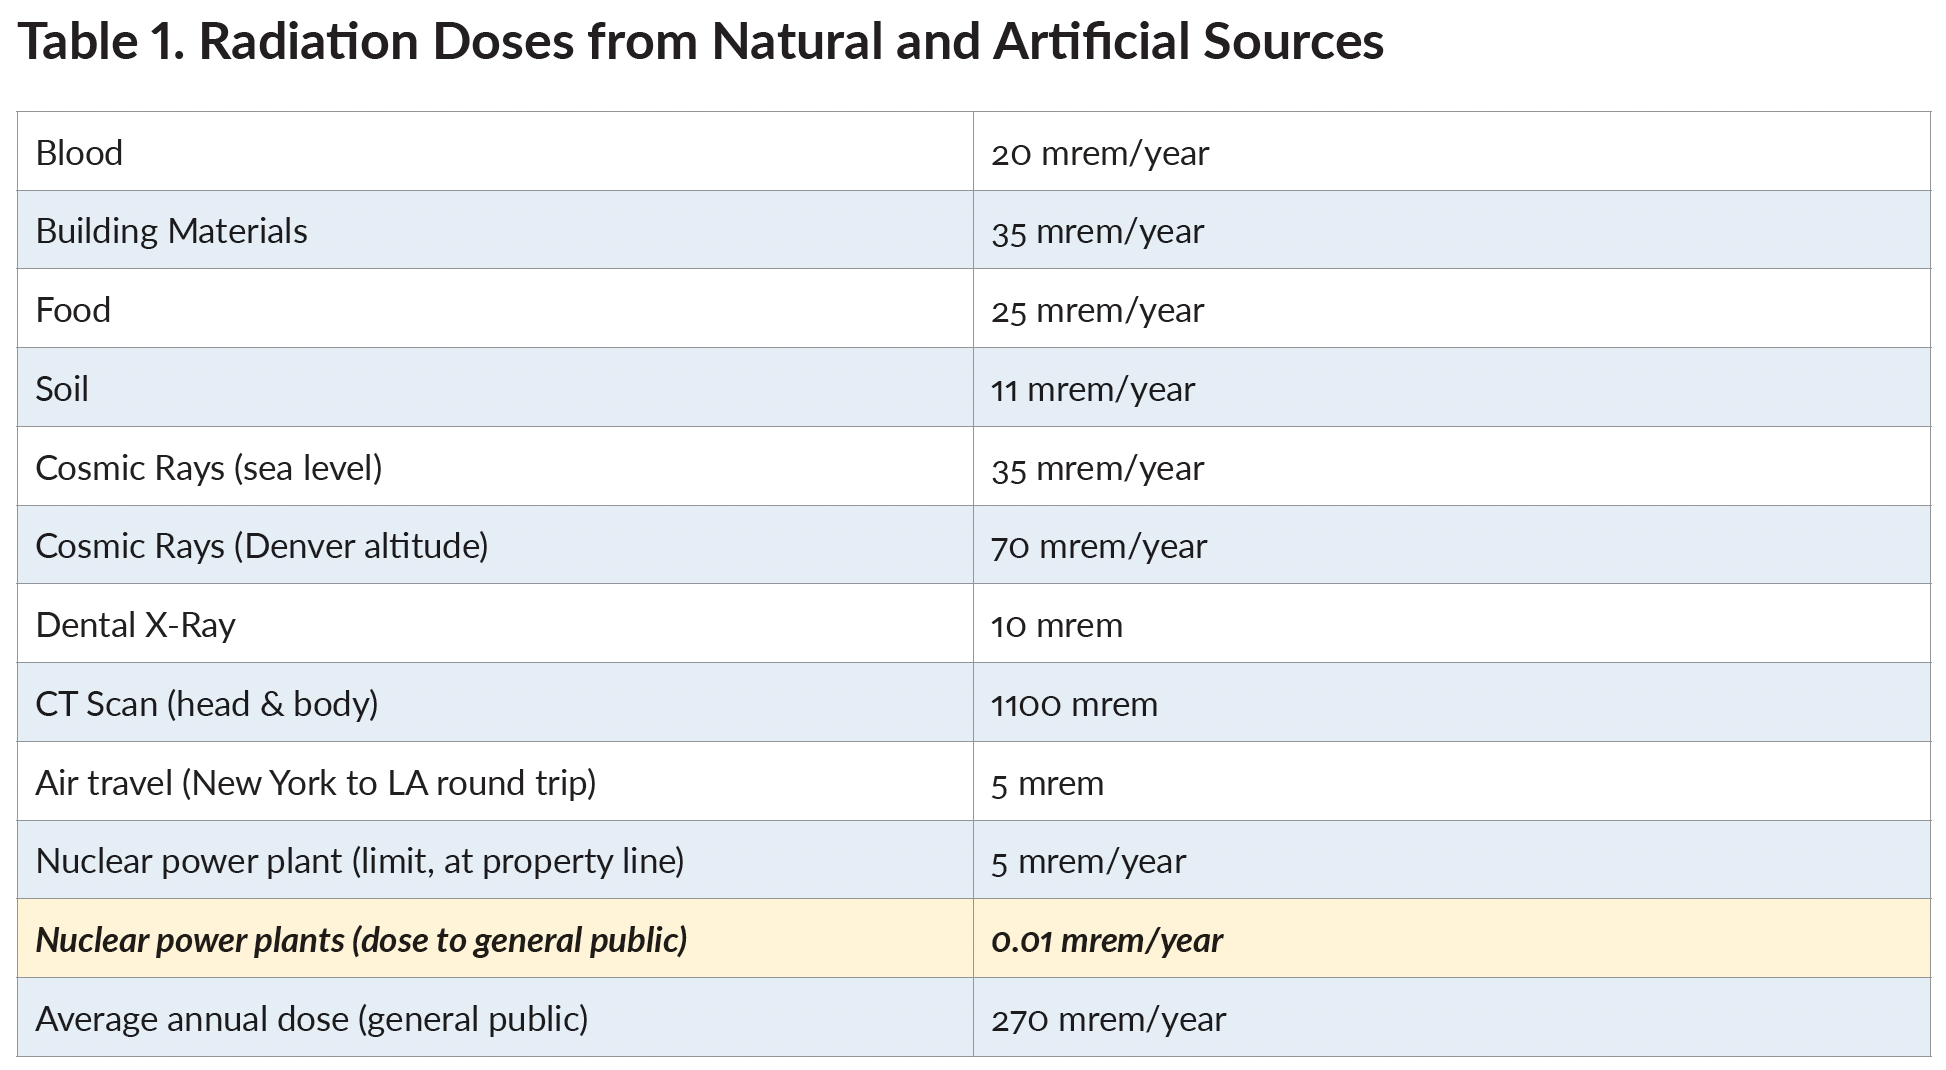 Table 1. Radiation Doses from Natural and Artificial Sources